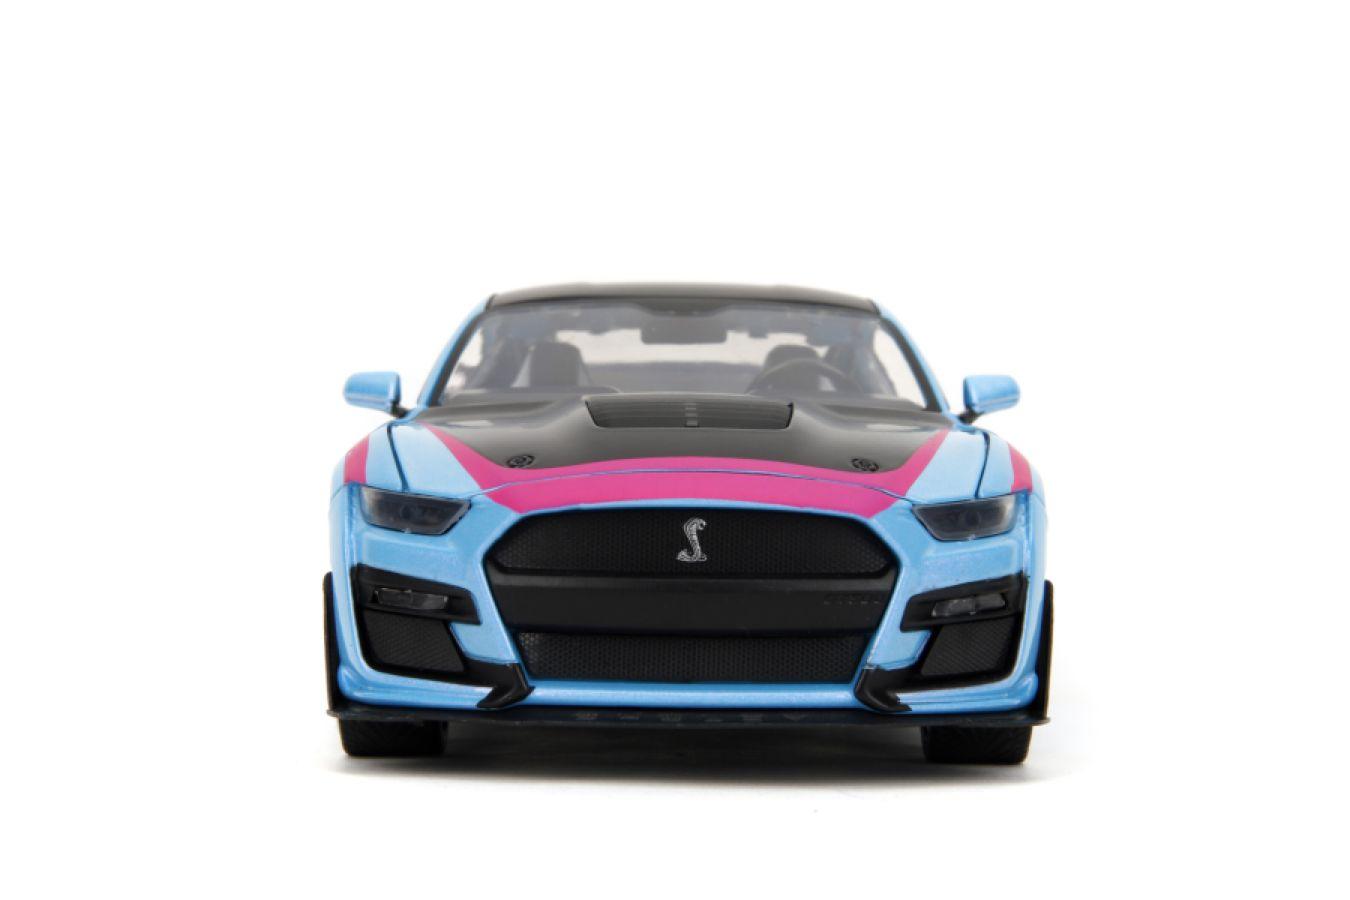 JAD35200 Pink Slips - 2020 Ford Mustang Shelby GT500 1:24 Scale Diecast Vehicle - Jada Toys - Titan Pop Culture